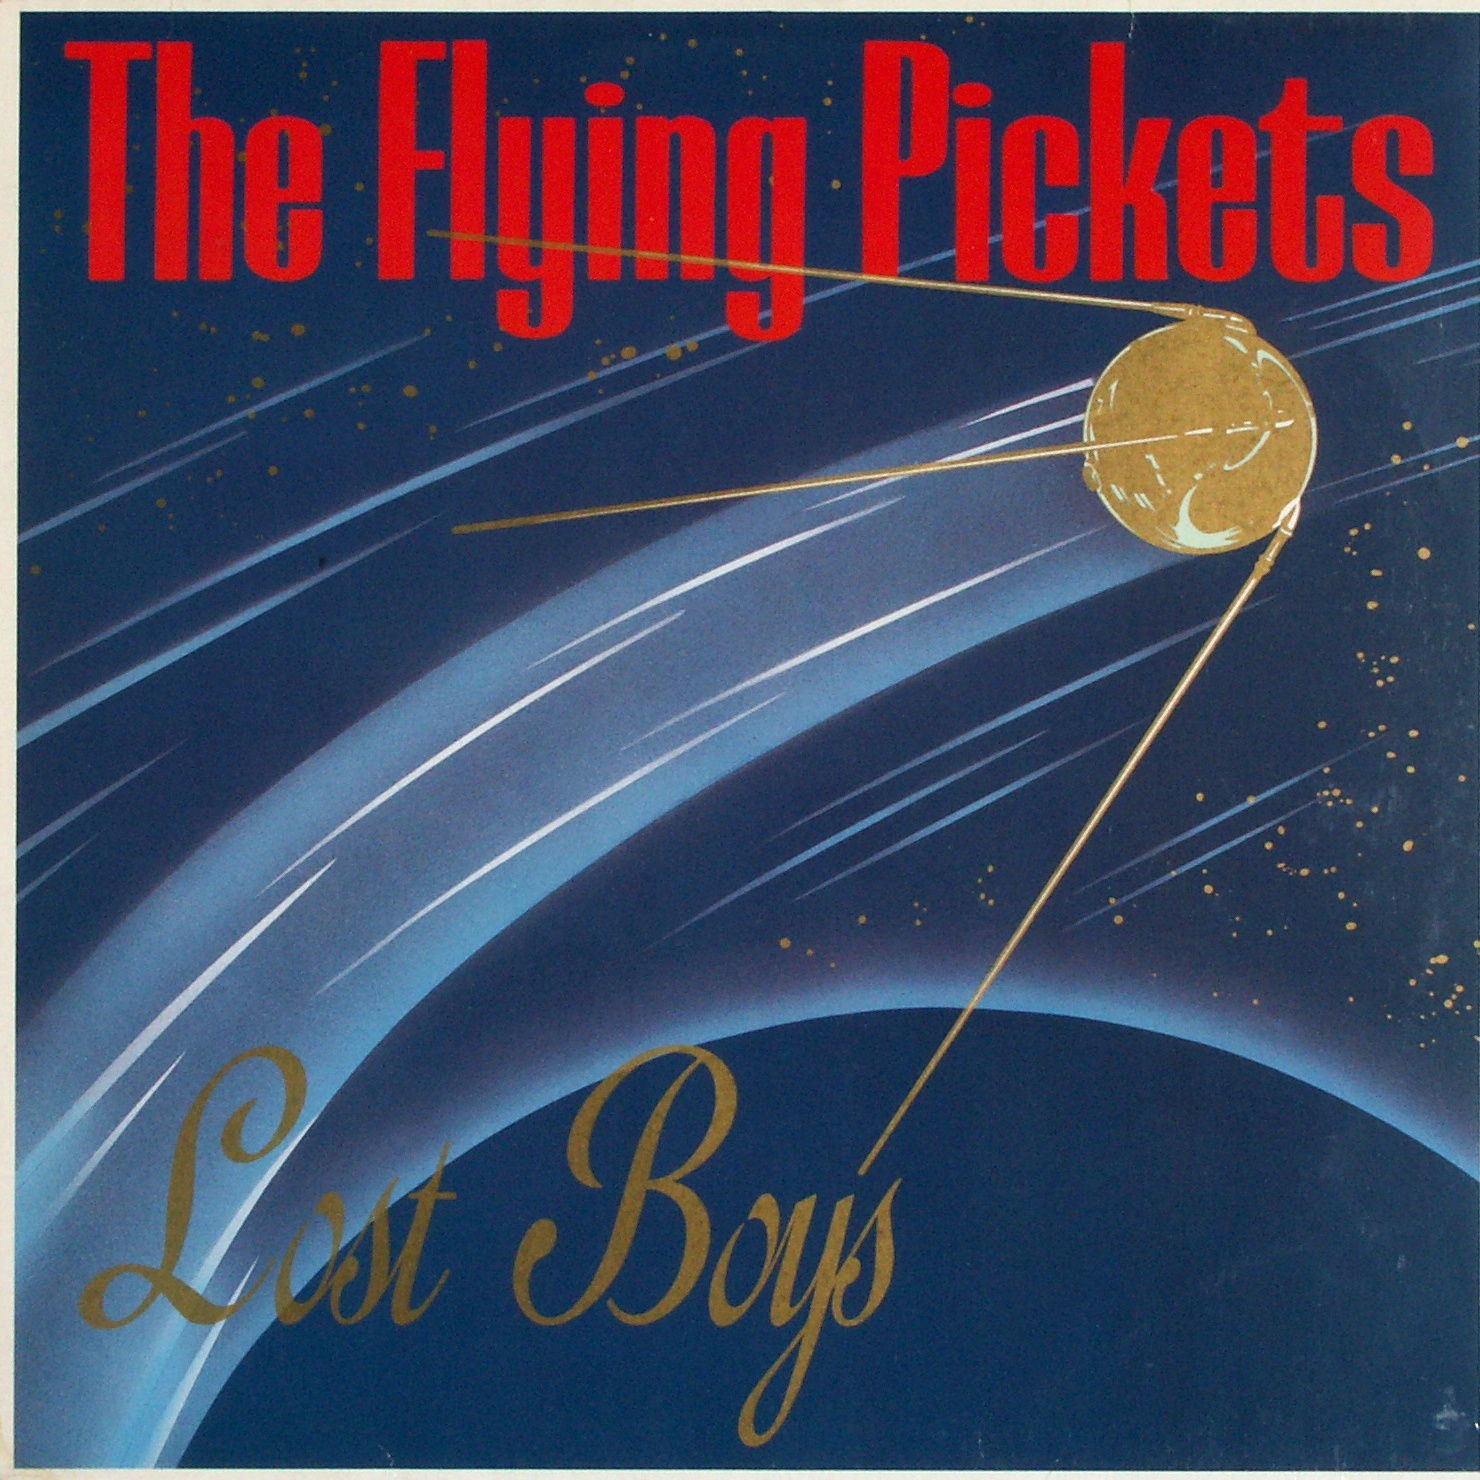 alt="The Flying Pickets - Lost Boys (1984, 10 Records / Virgin Records) COVER"